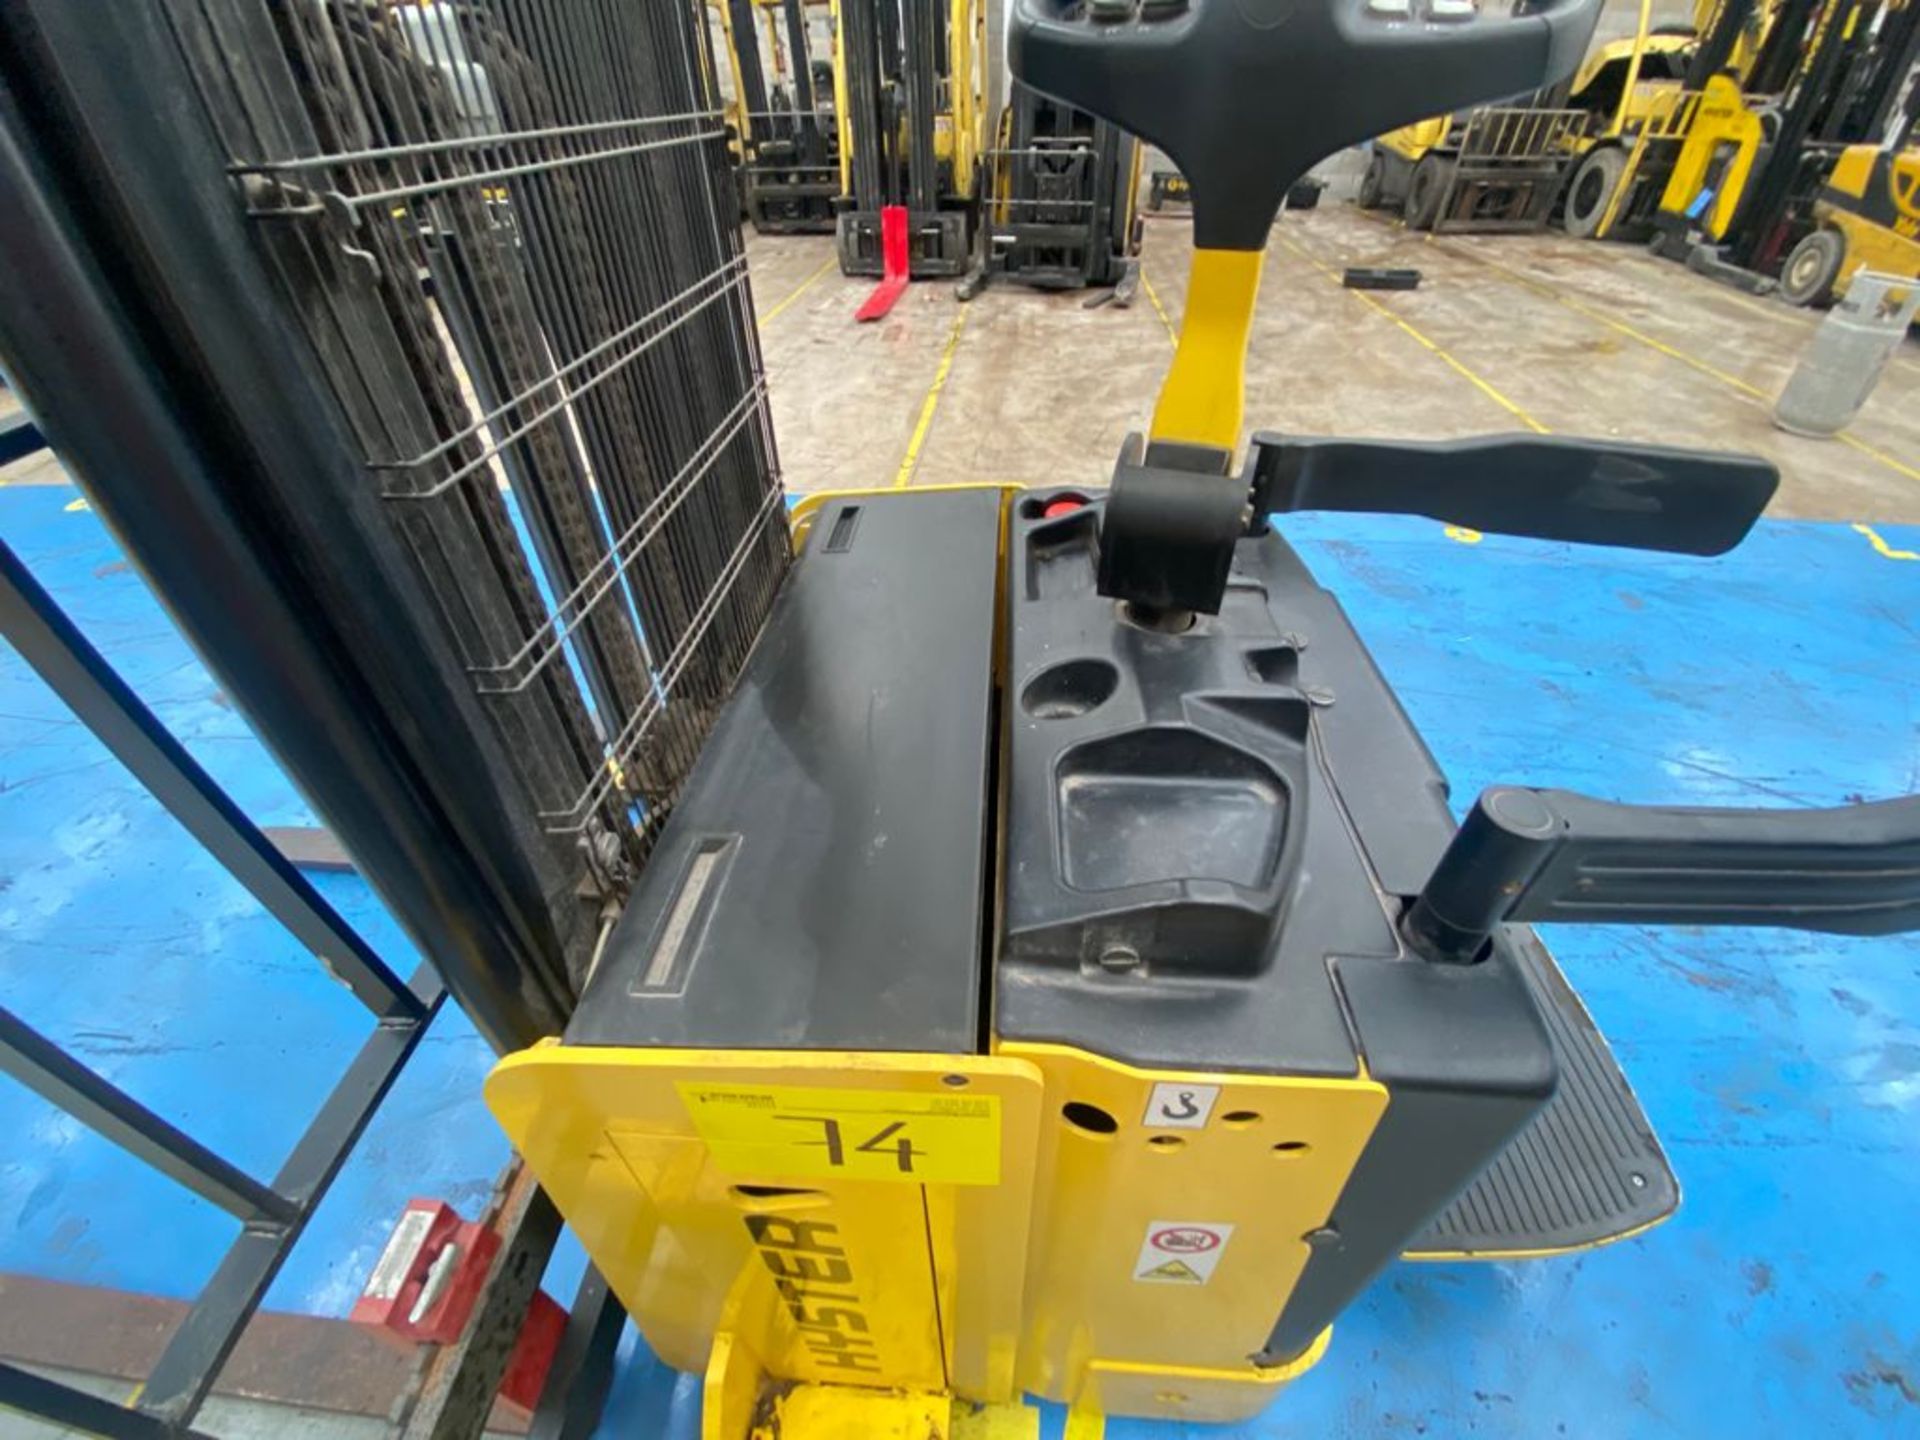 Hyster Electric Platform High Lift Stacker Model S1.5S, SN C442T03146R, Year 2017, 1.5 tons capacity - Image 16 of 34